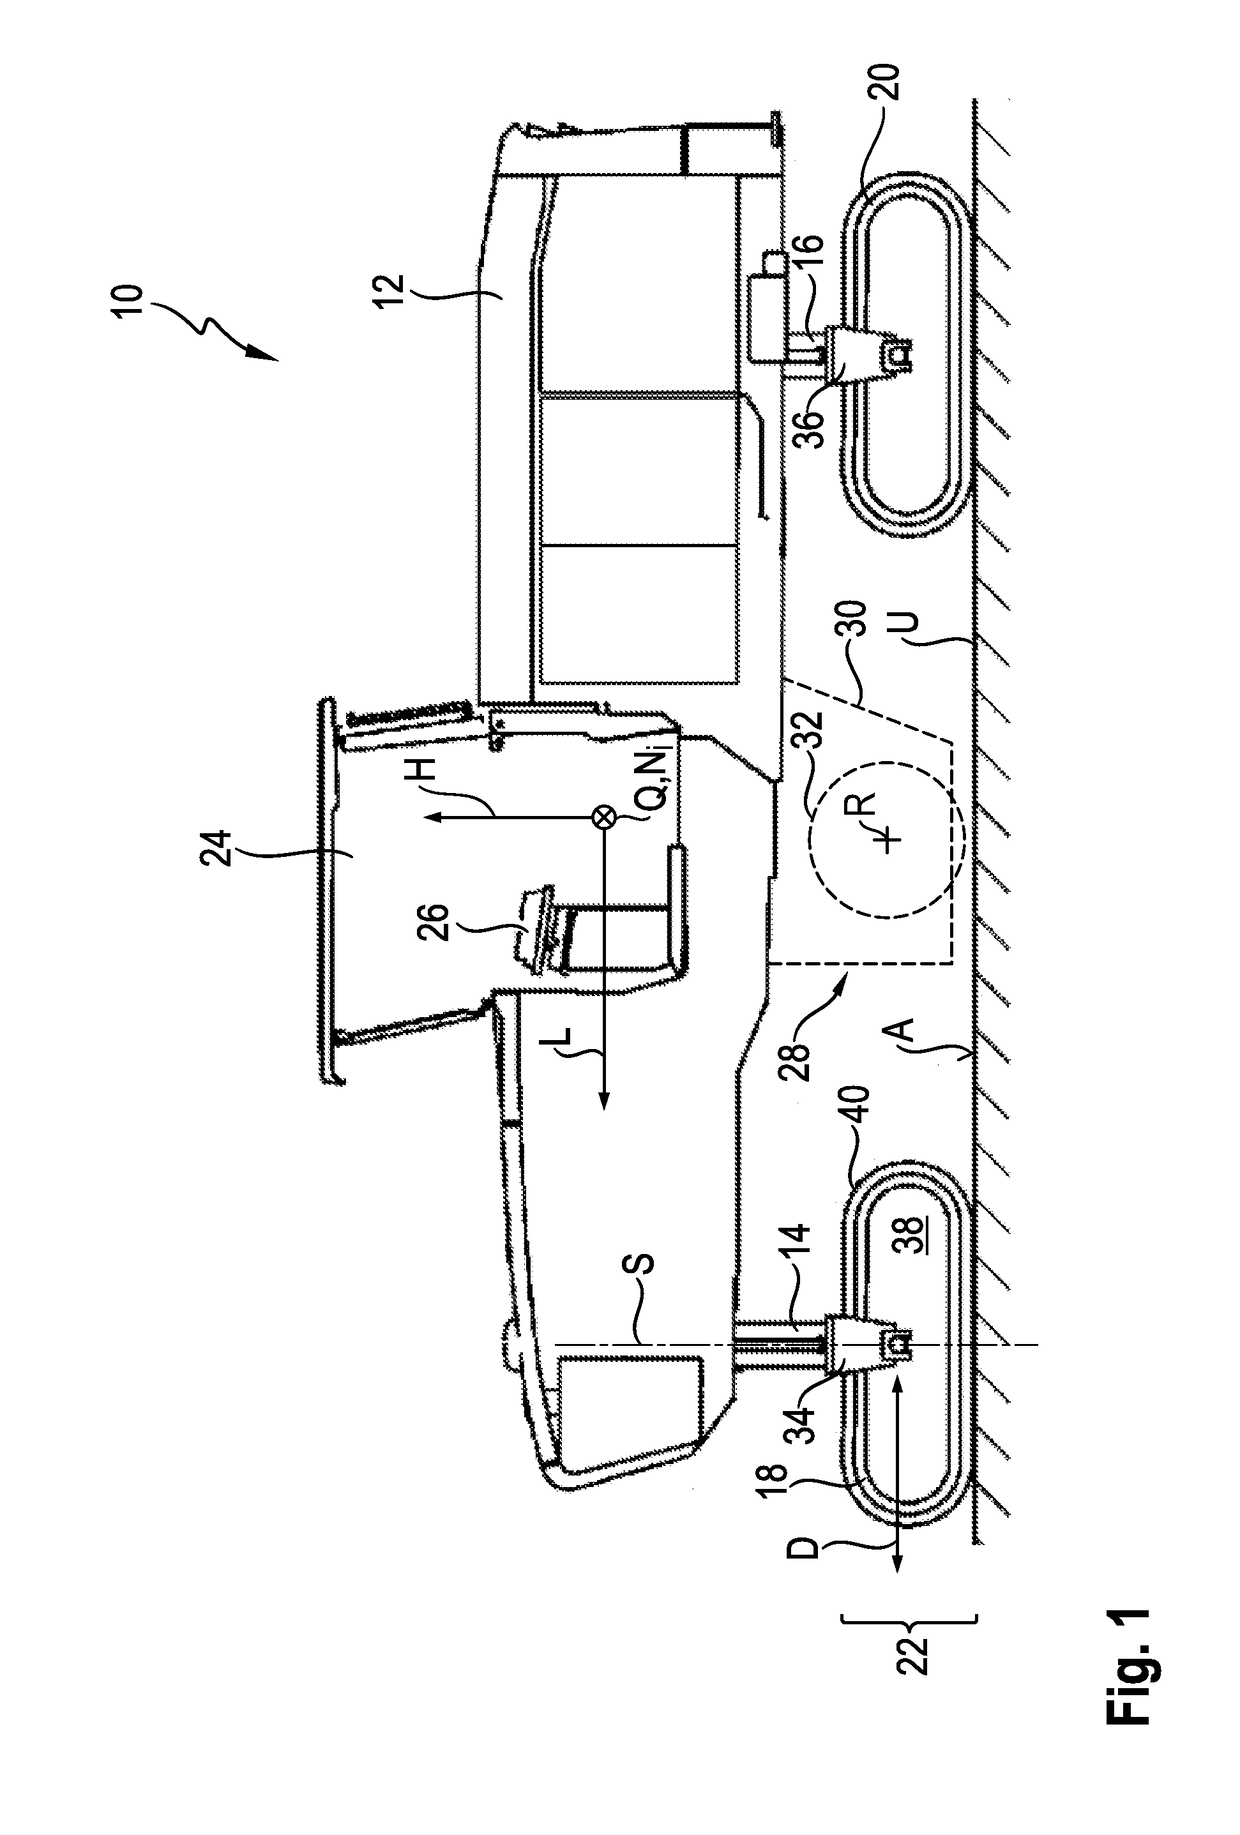 Method for Coupling a Machine Frame of an Earth Working Machine to a Working Device, Earth Working Machine, and Connecting Apparatus for the Method